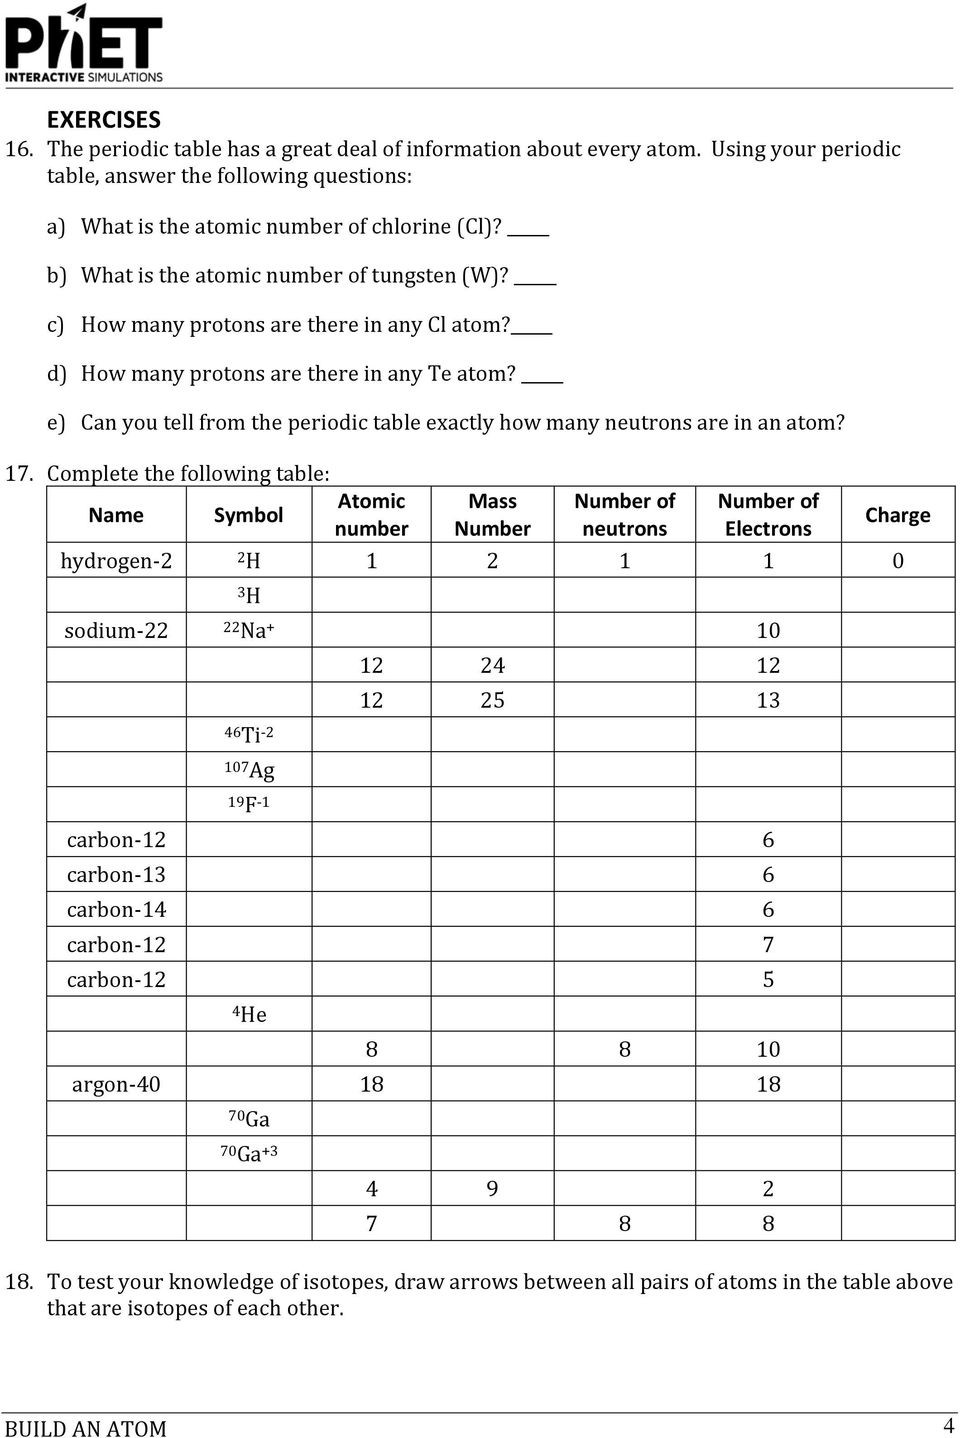 Isotopes Ions and atoms Worksheet Unit 2 atomic Structure Pdf Free Download